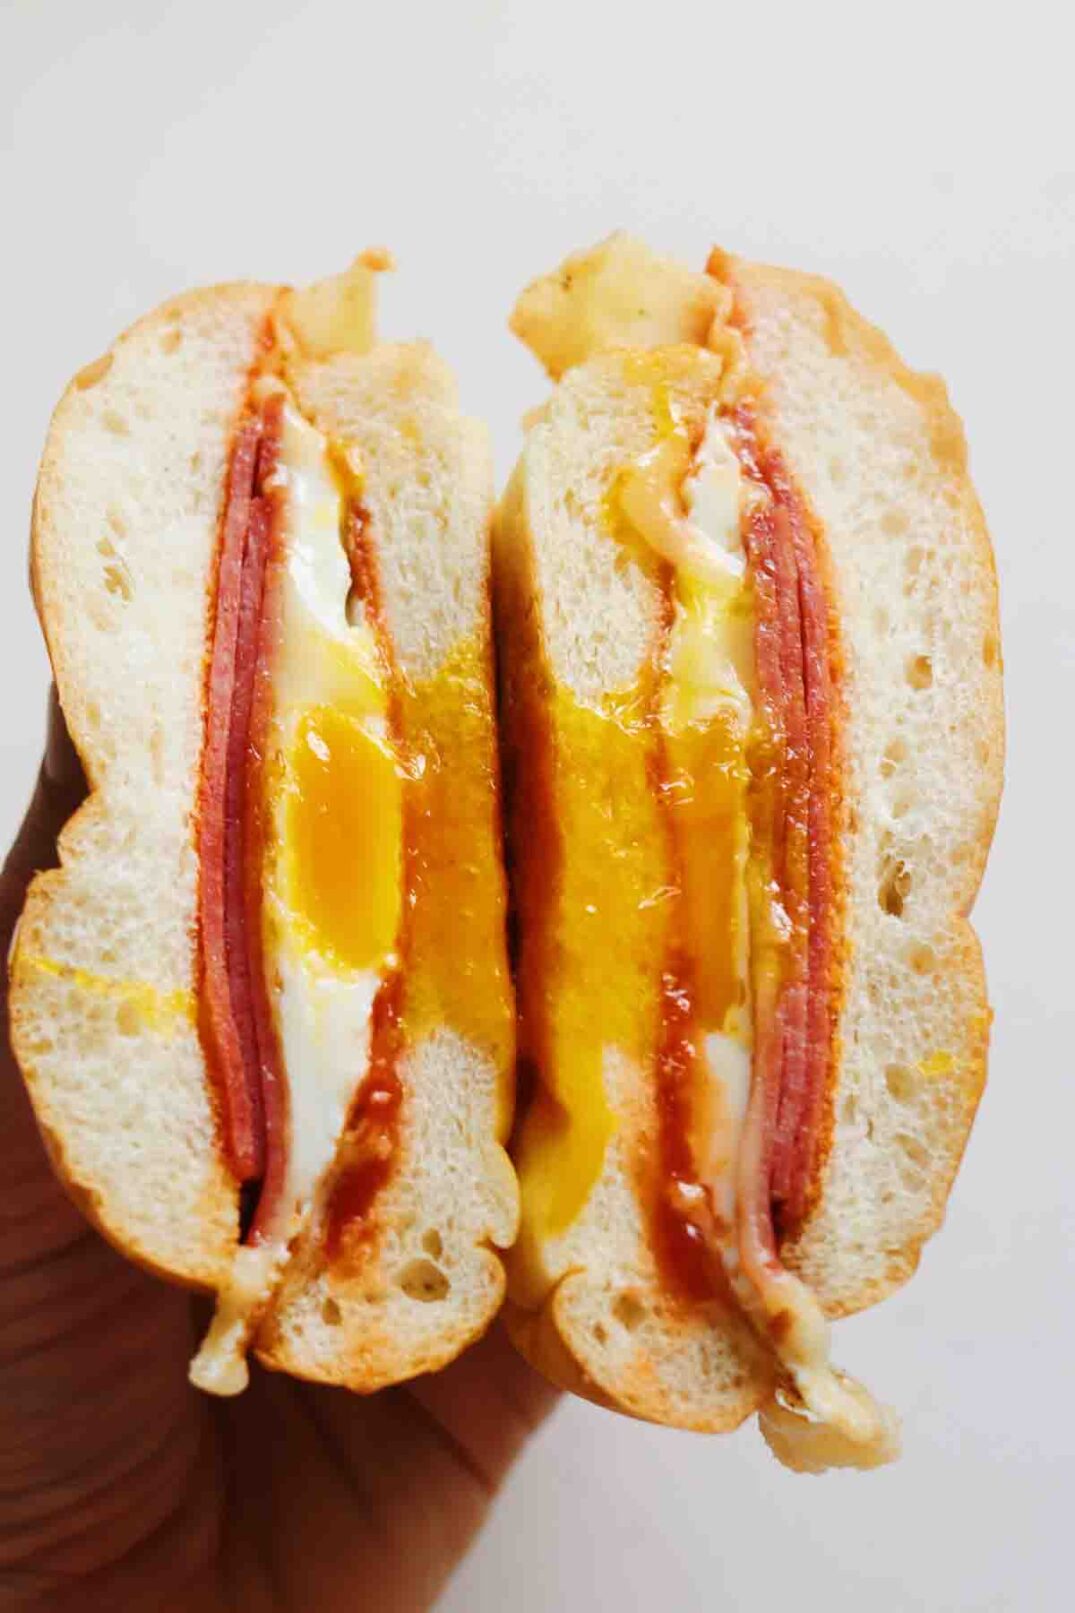 a hand holding a pork roll egg and cheese sandwich with egg yolk dripping out.